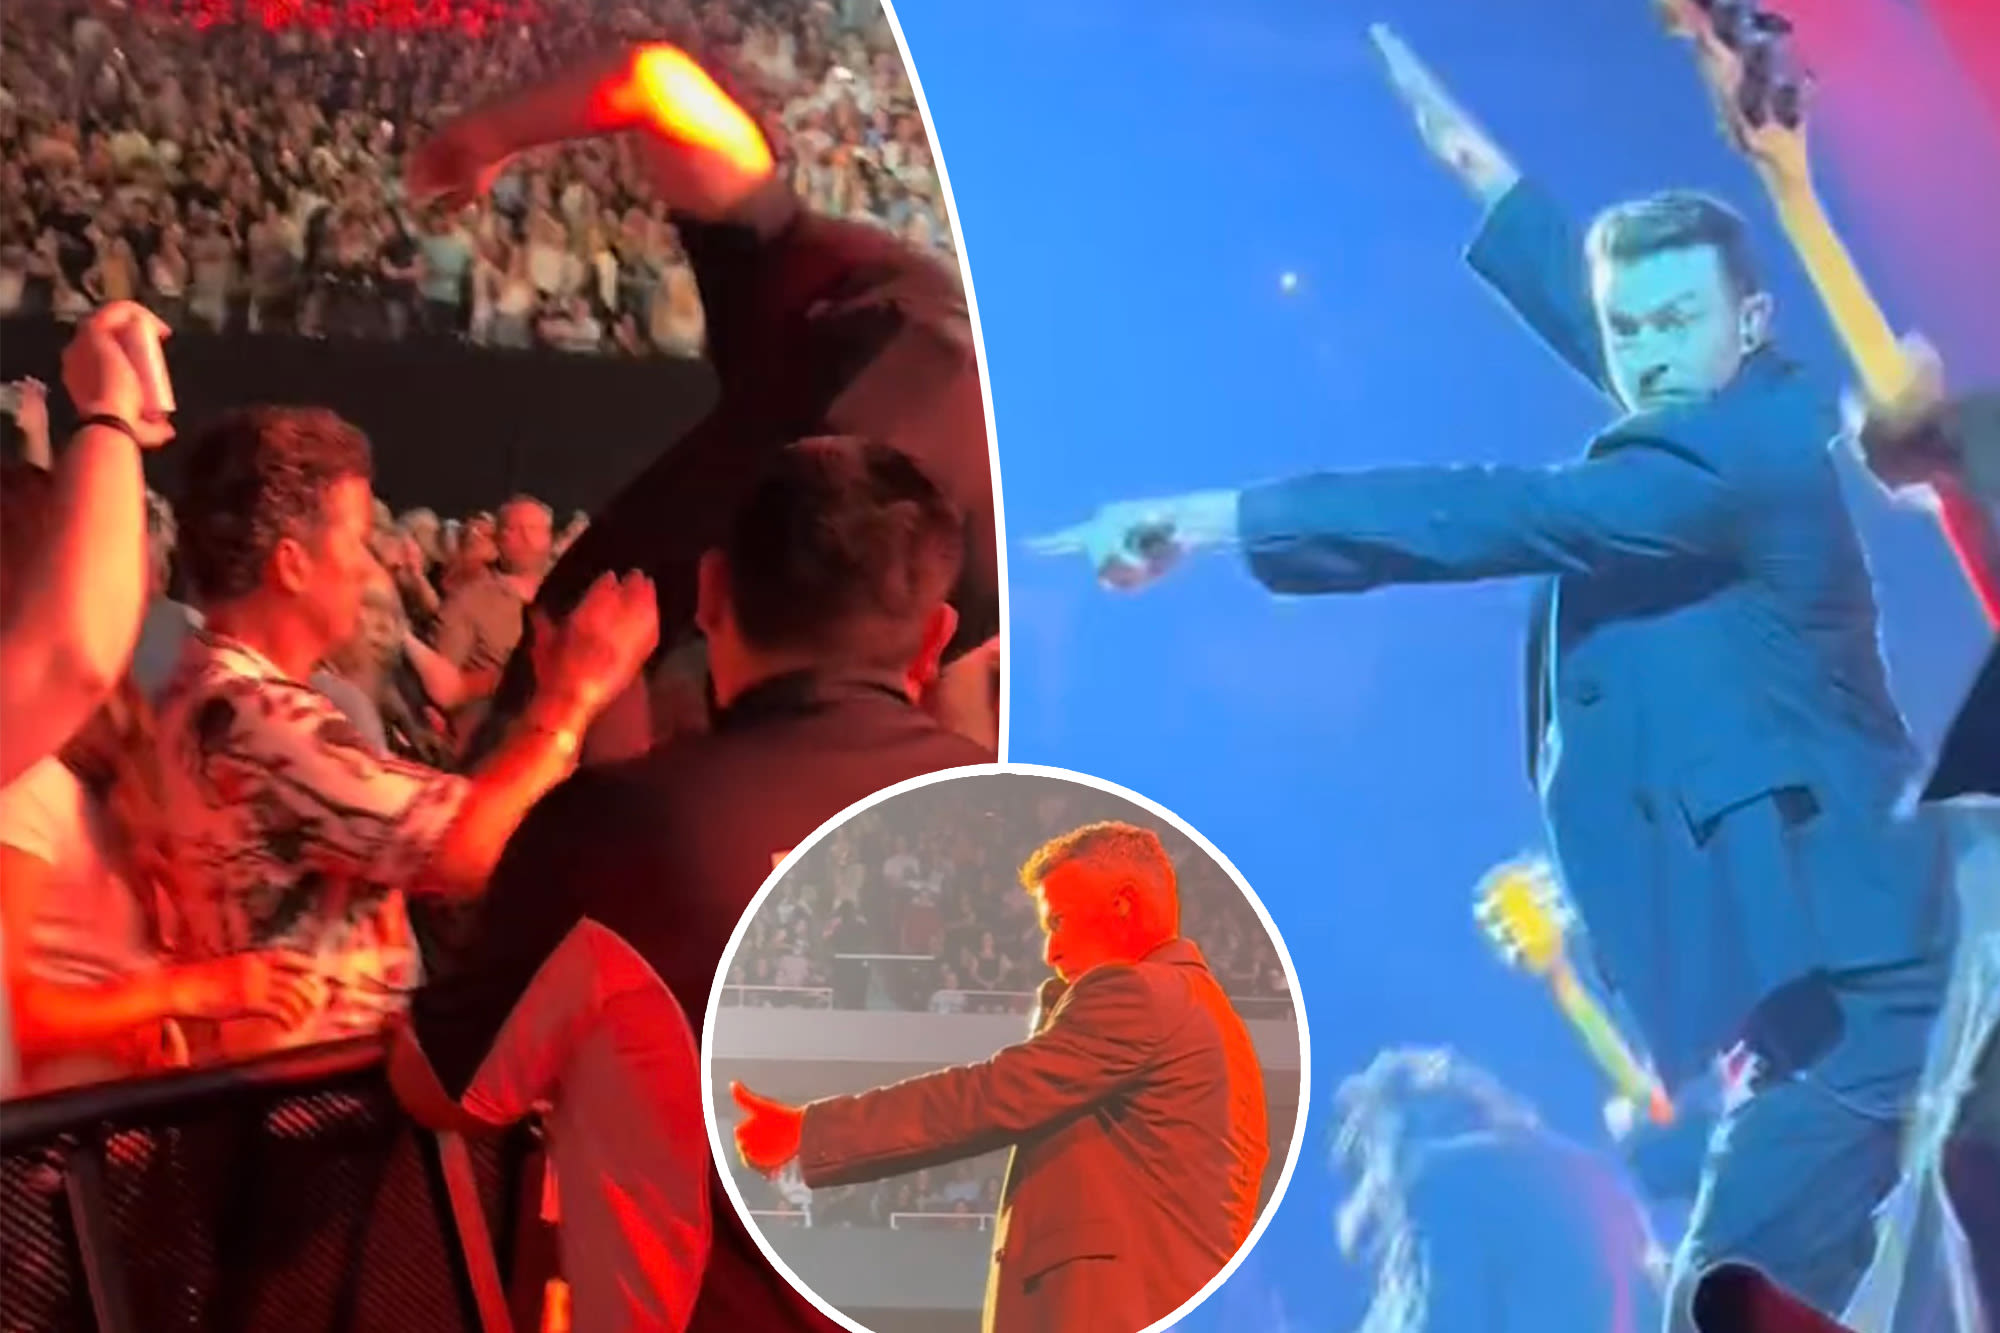 Justin Timberlake abruptly stops Texas concert to help a fan: ‘We need assistance’